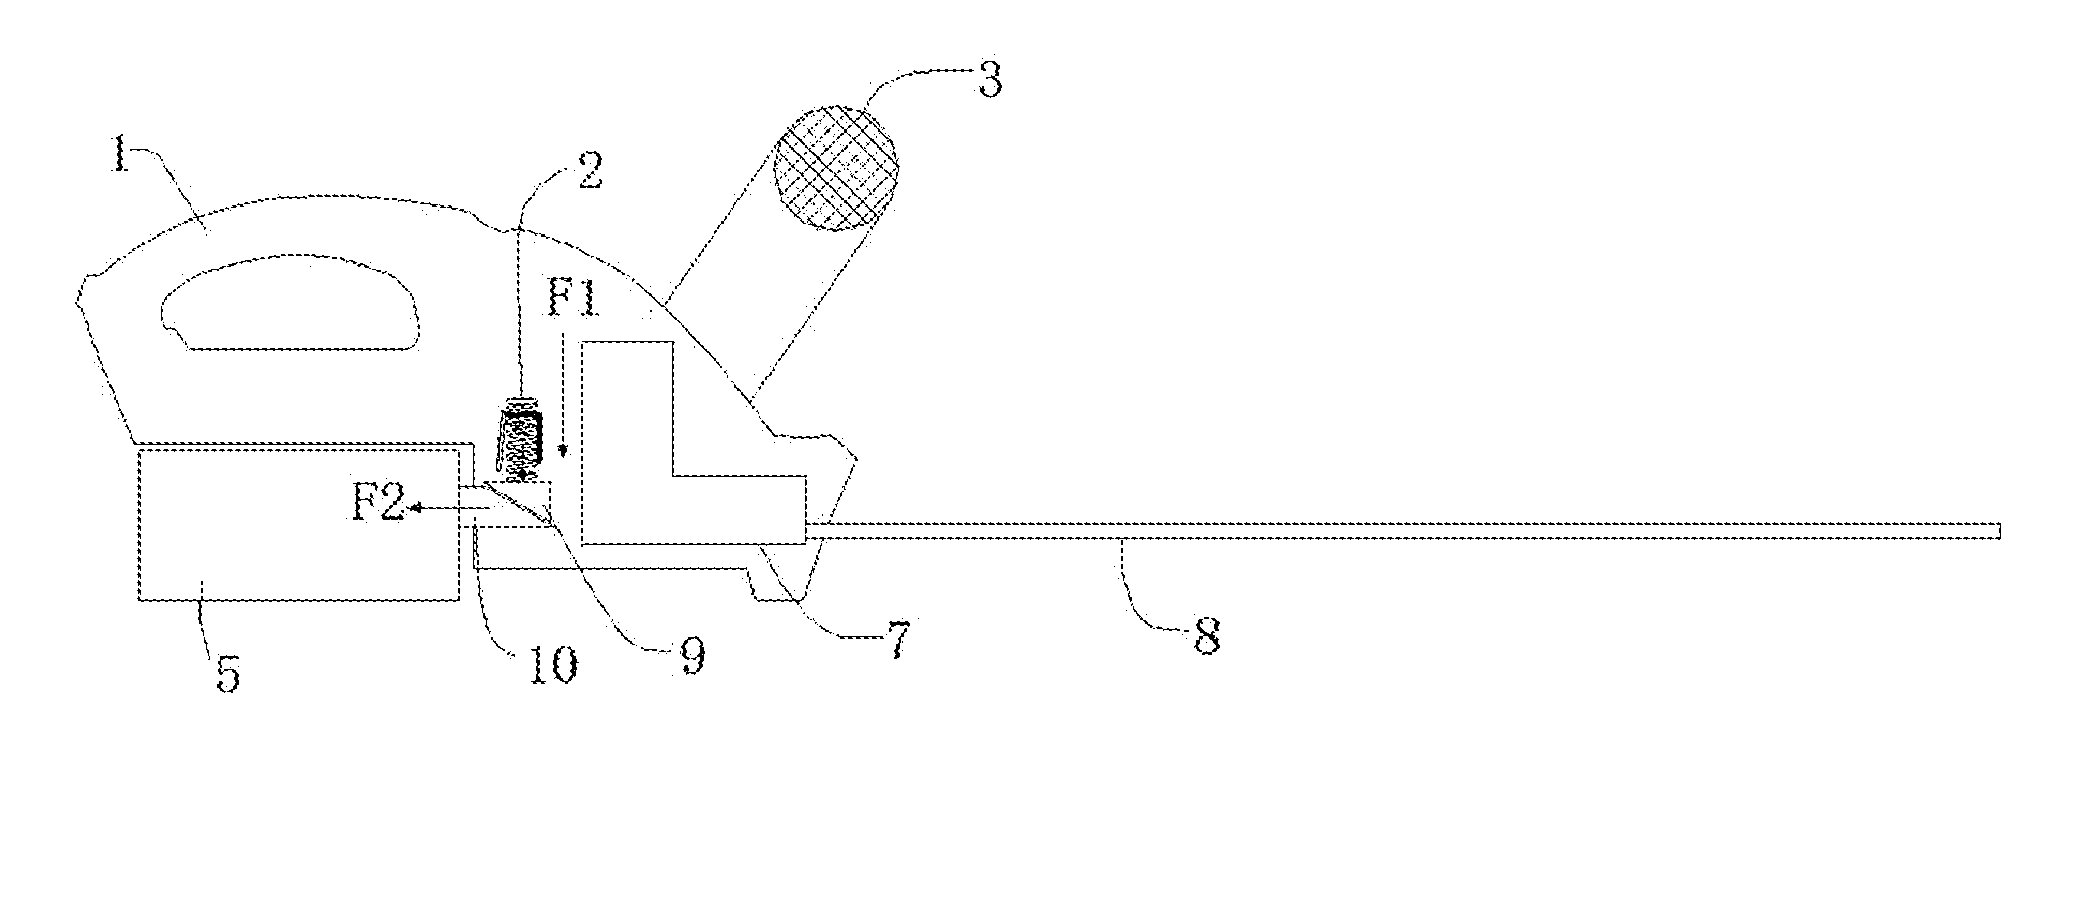 Electrical tool with battery pack ejection assist mechanism